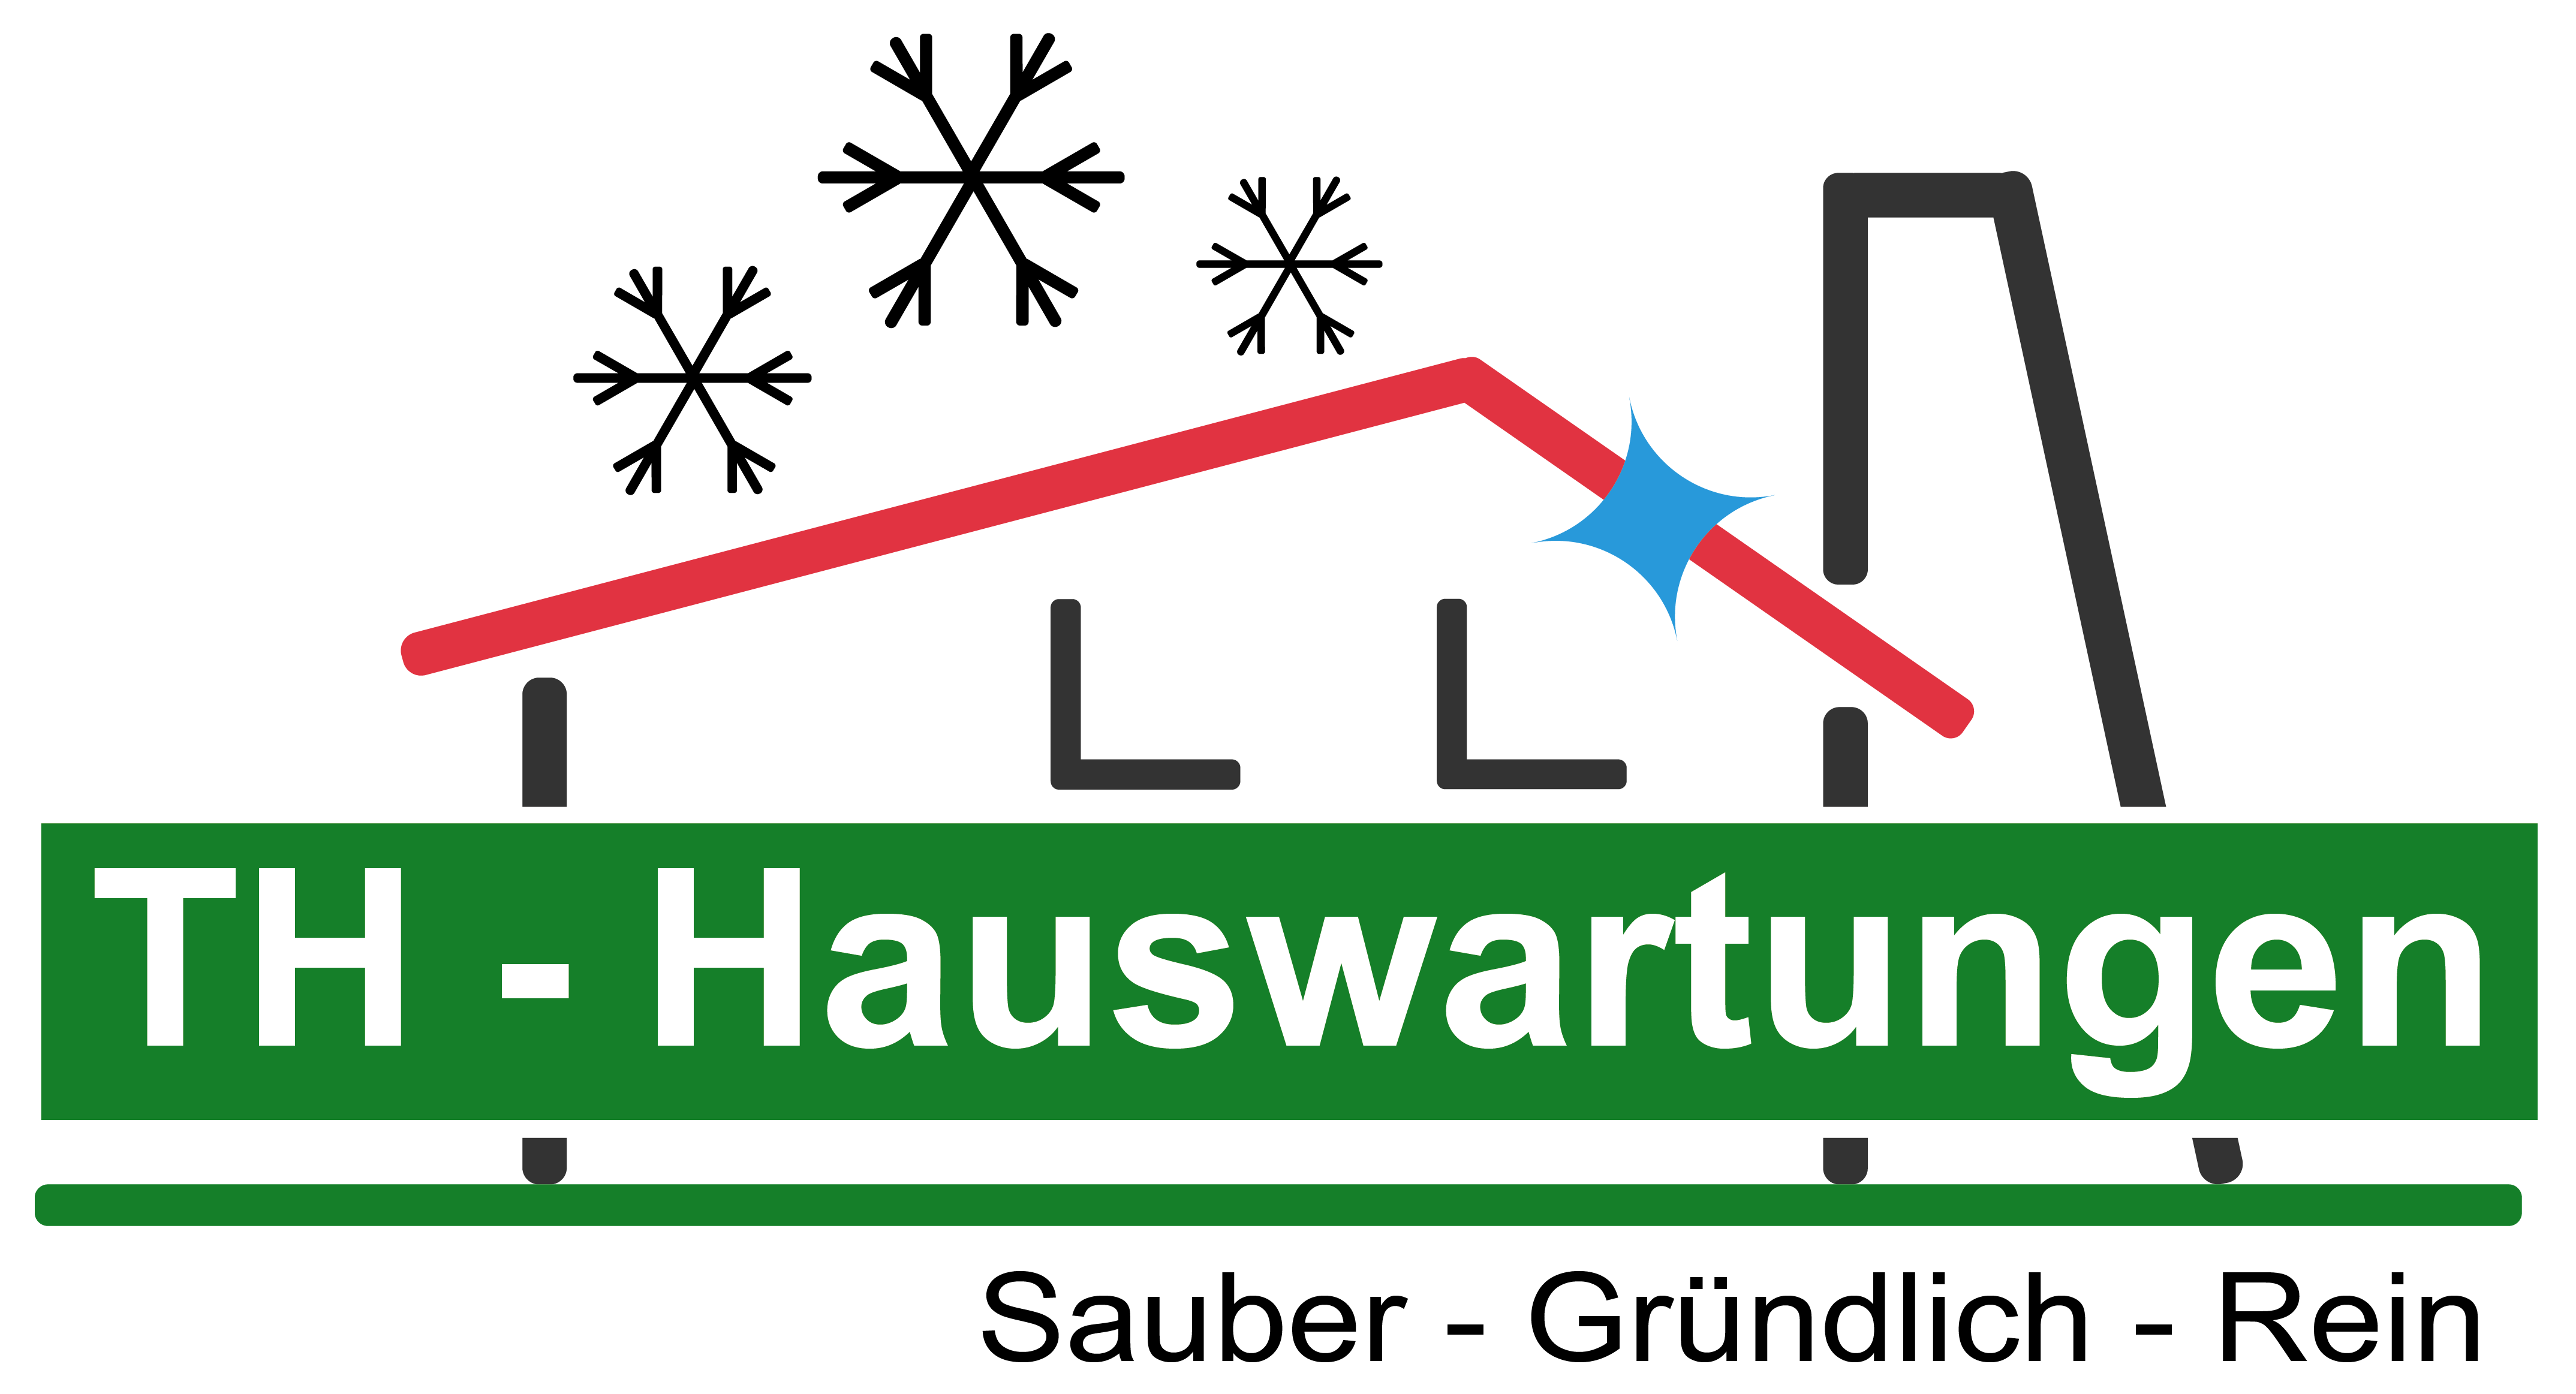 (c) Th-hauswartung.ch